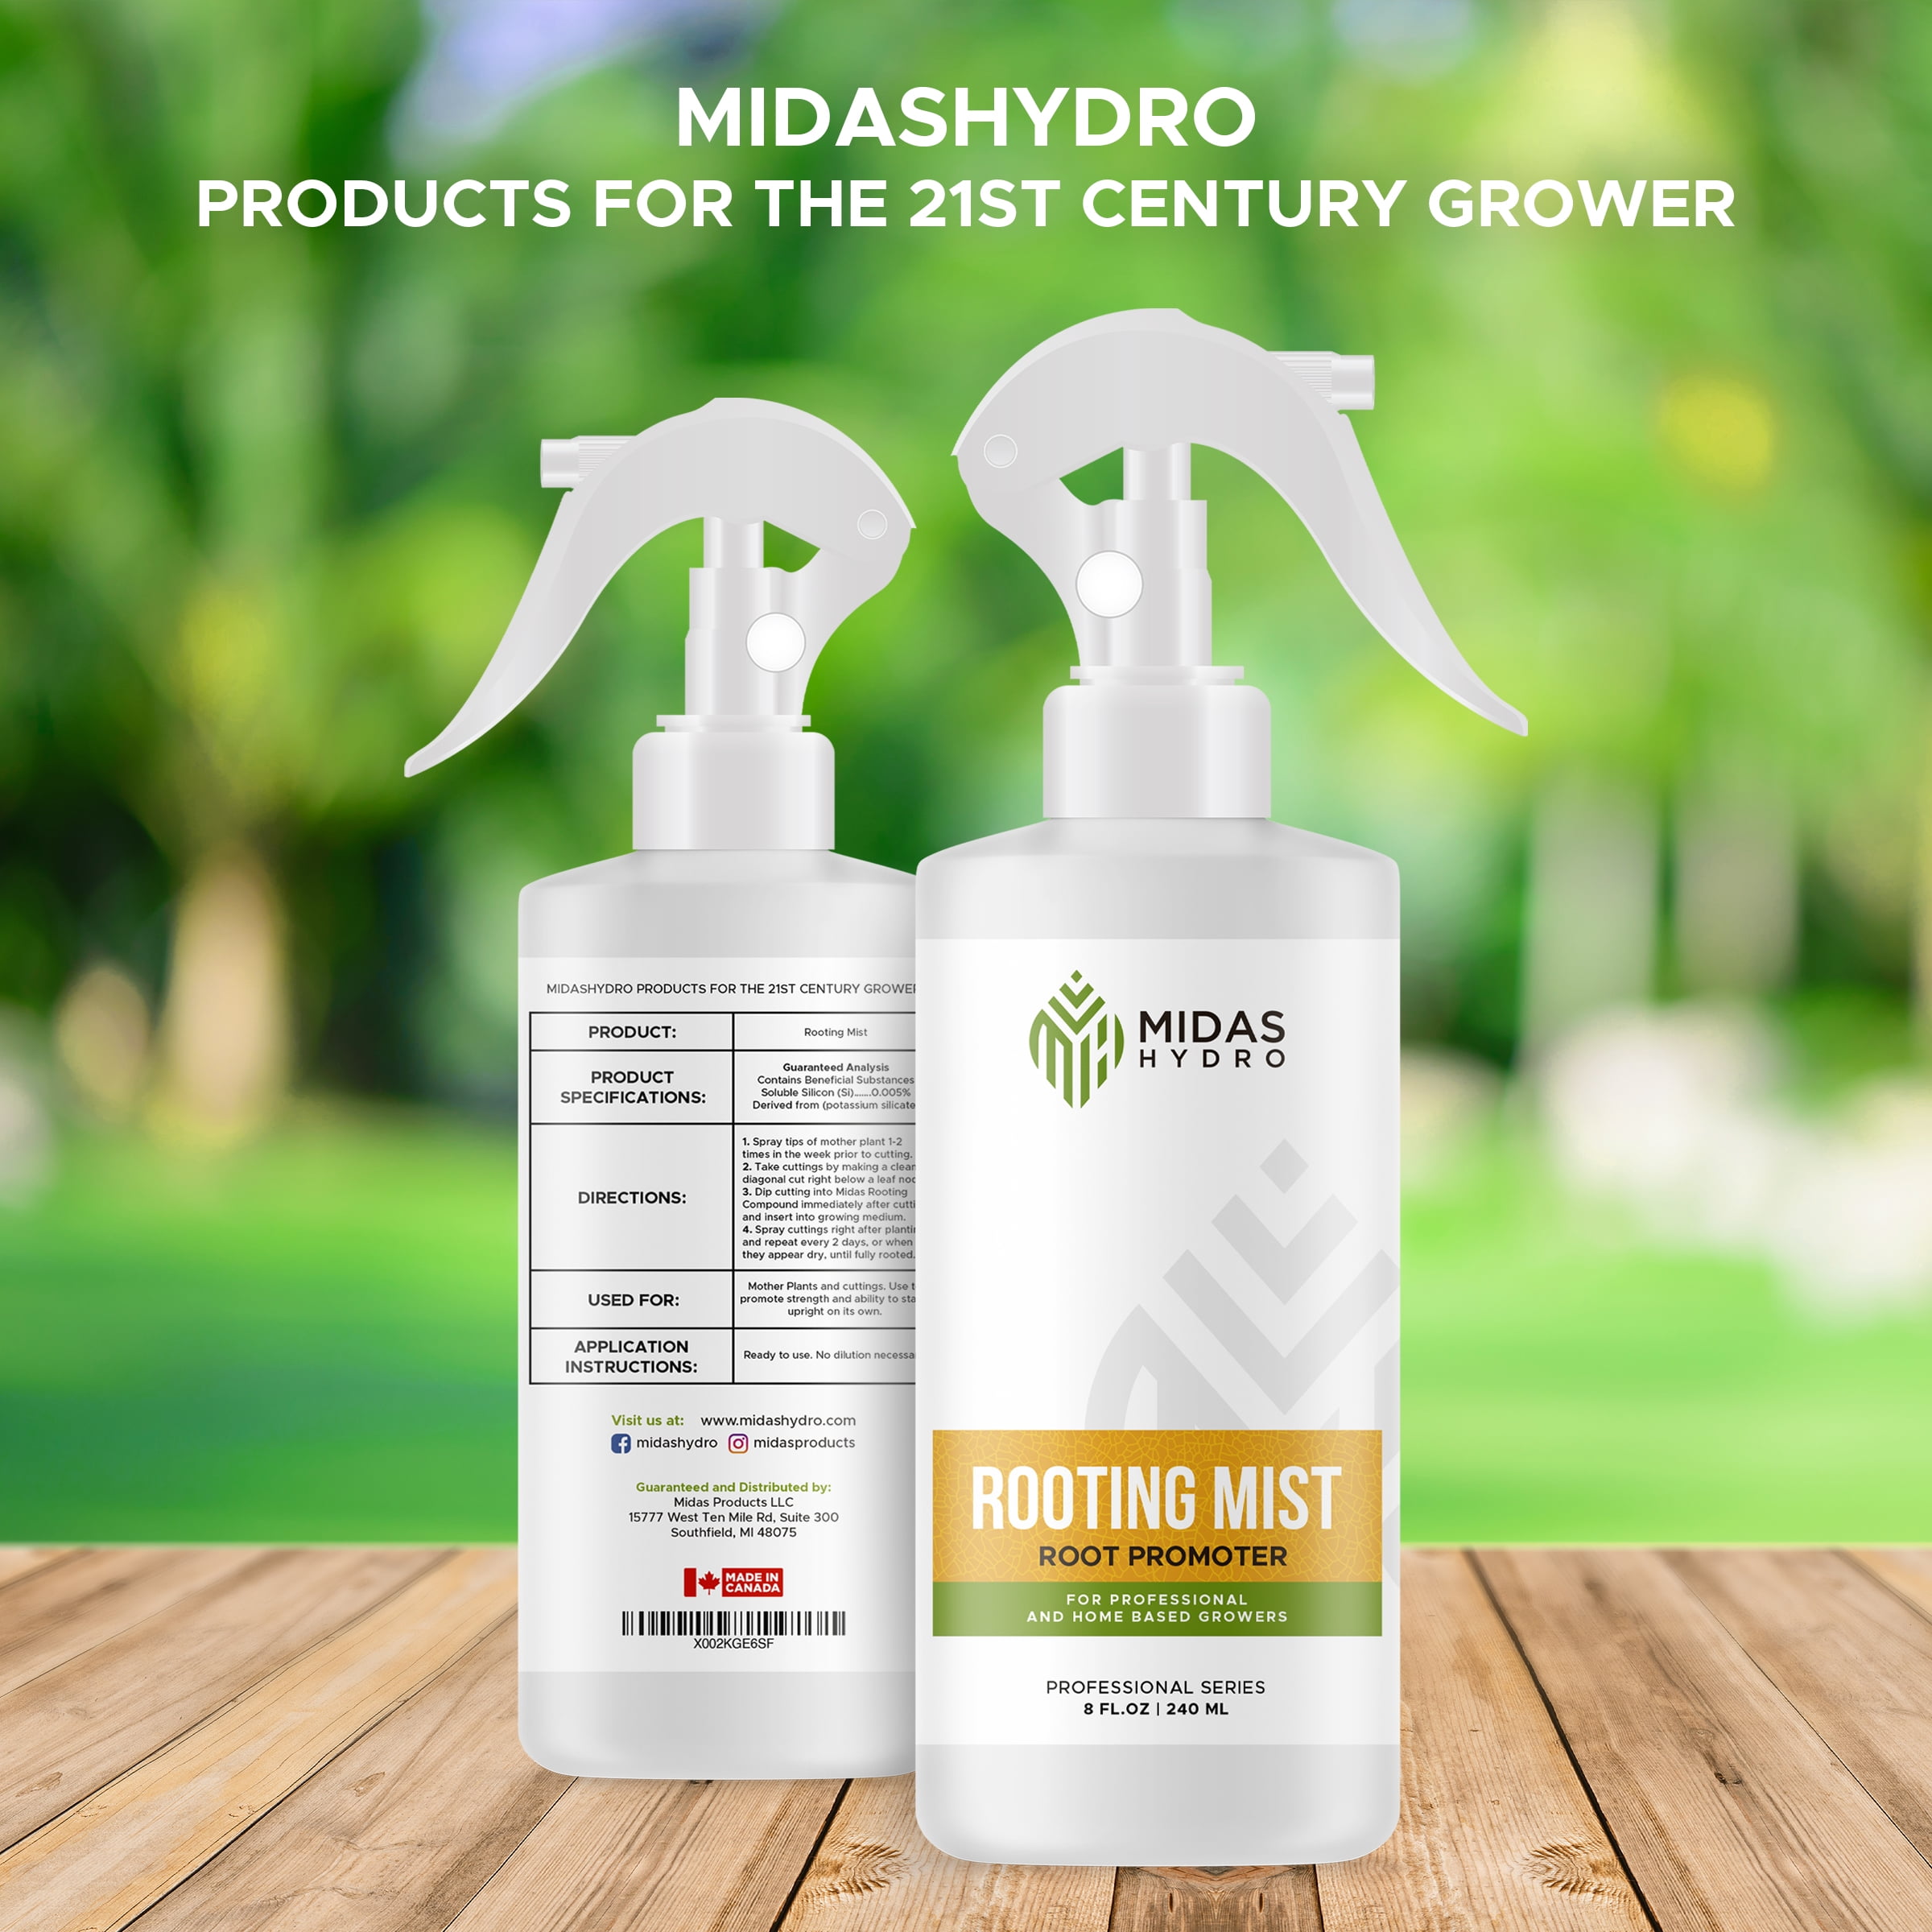 Buy Rooting Promoter Mist for Plant Cloning - Root Starter for Plant Cloning - Stimulate Root Growth for Hydroponic Cuttings - Indoor Plant Food and Nutrients for Growth - Cloning Succulents